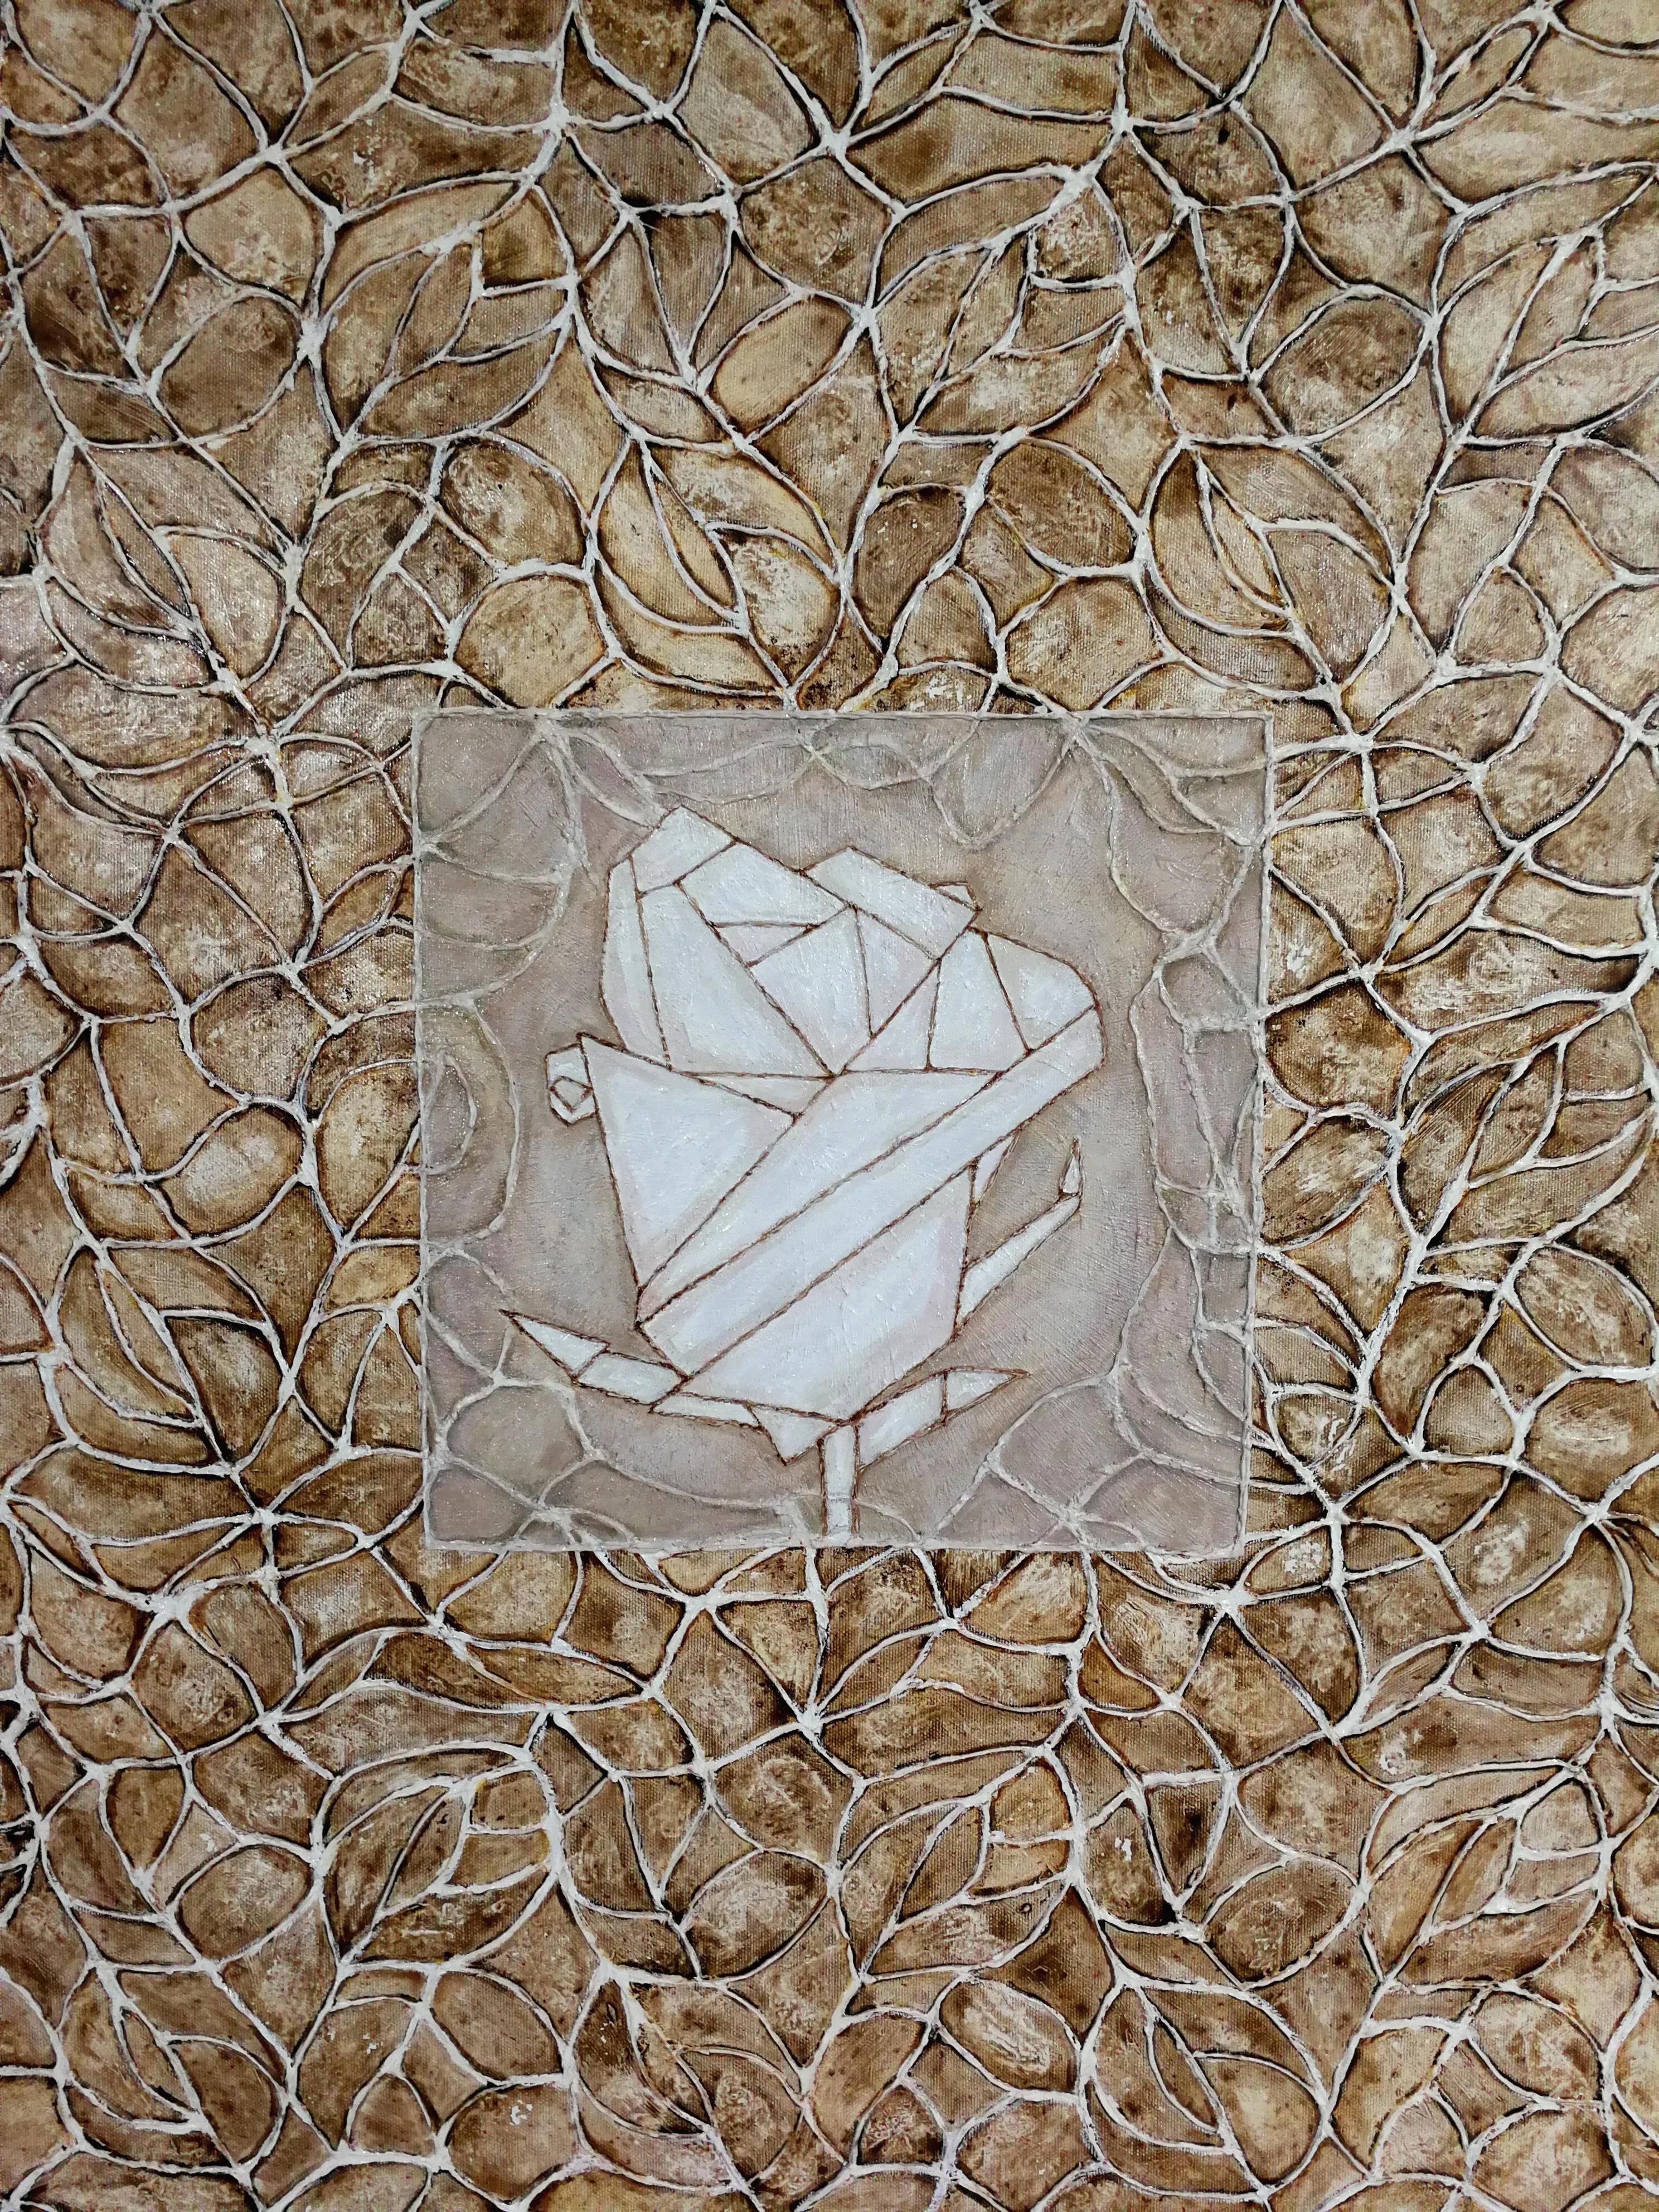 A detail of the painting depicting a white rose on a darker background, measuring 100x100cm, made in 2017 using oil on canvas technique